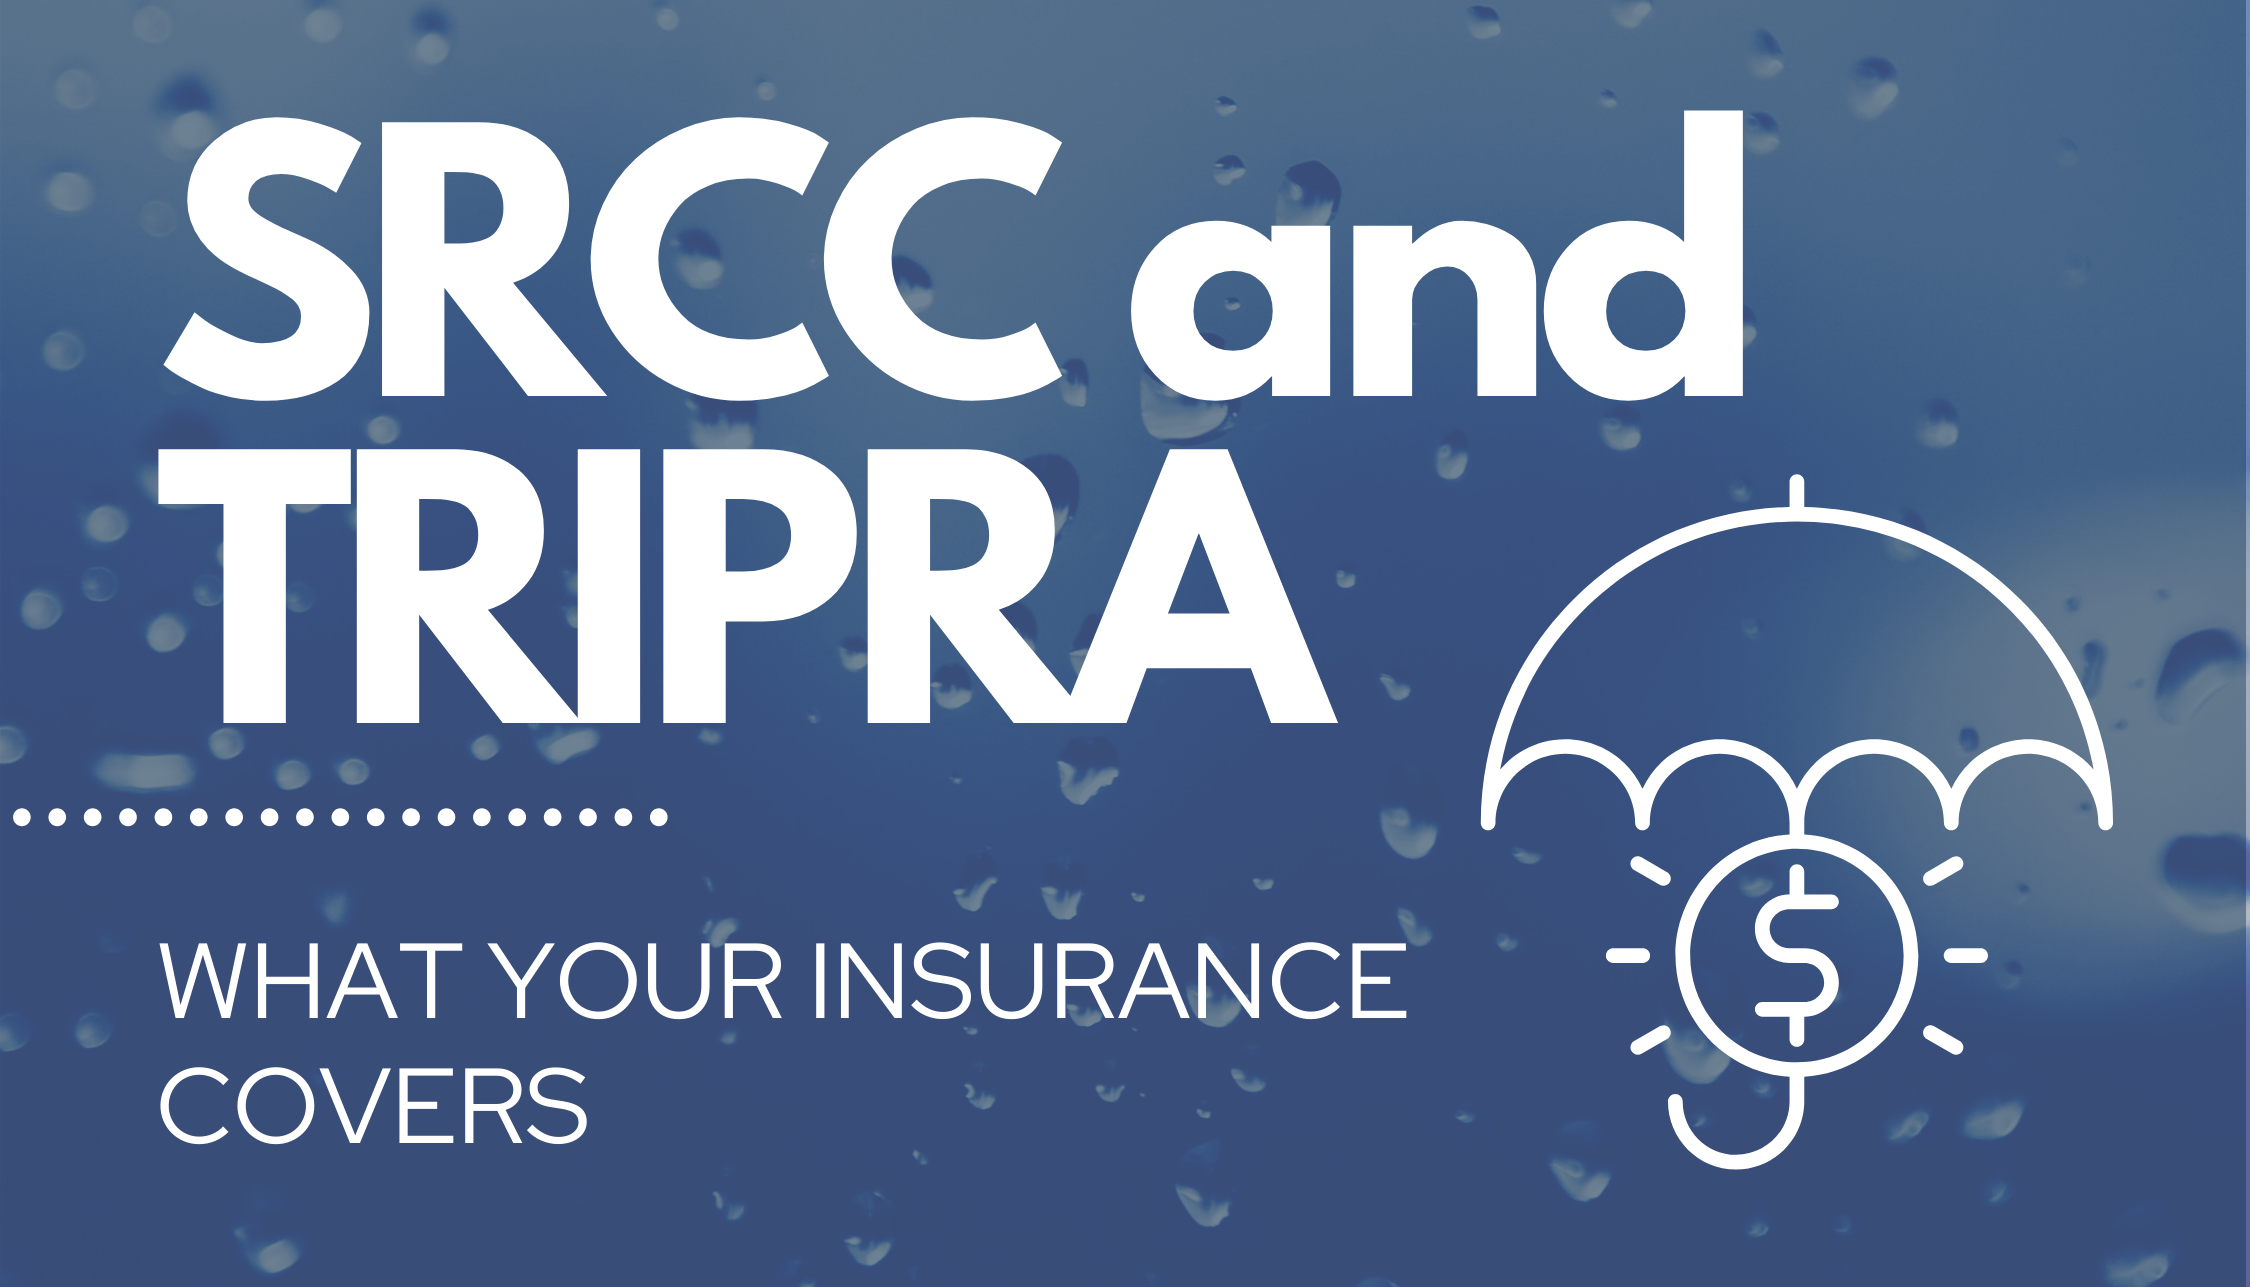 SRCC and TRIPRA: What Your Insurance Covers